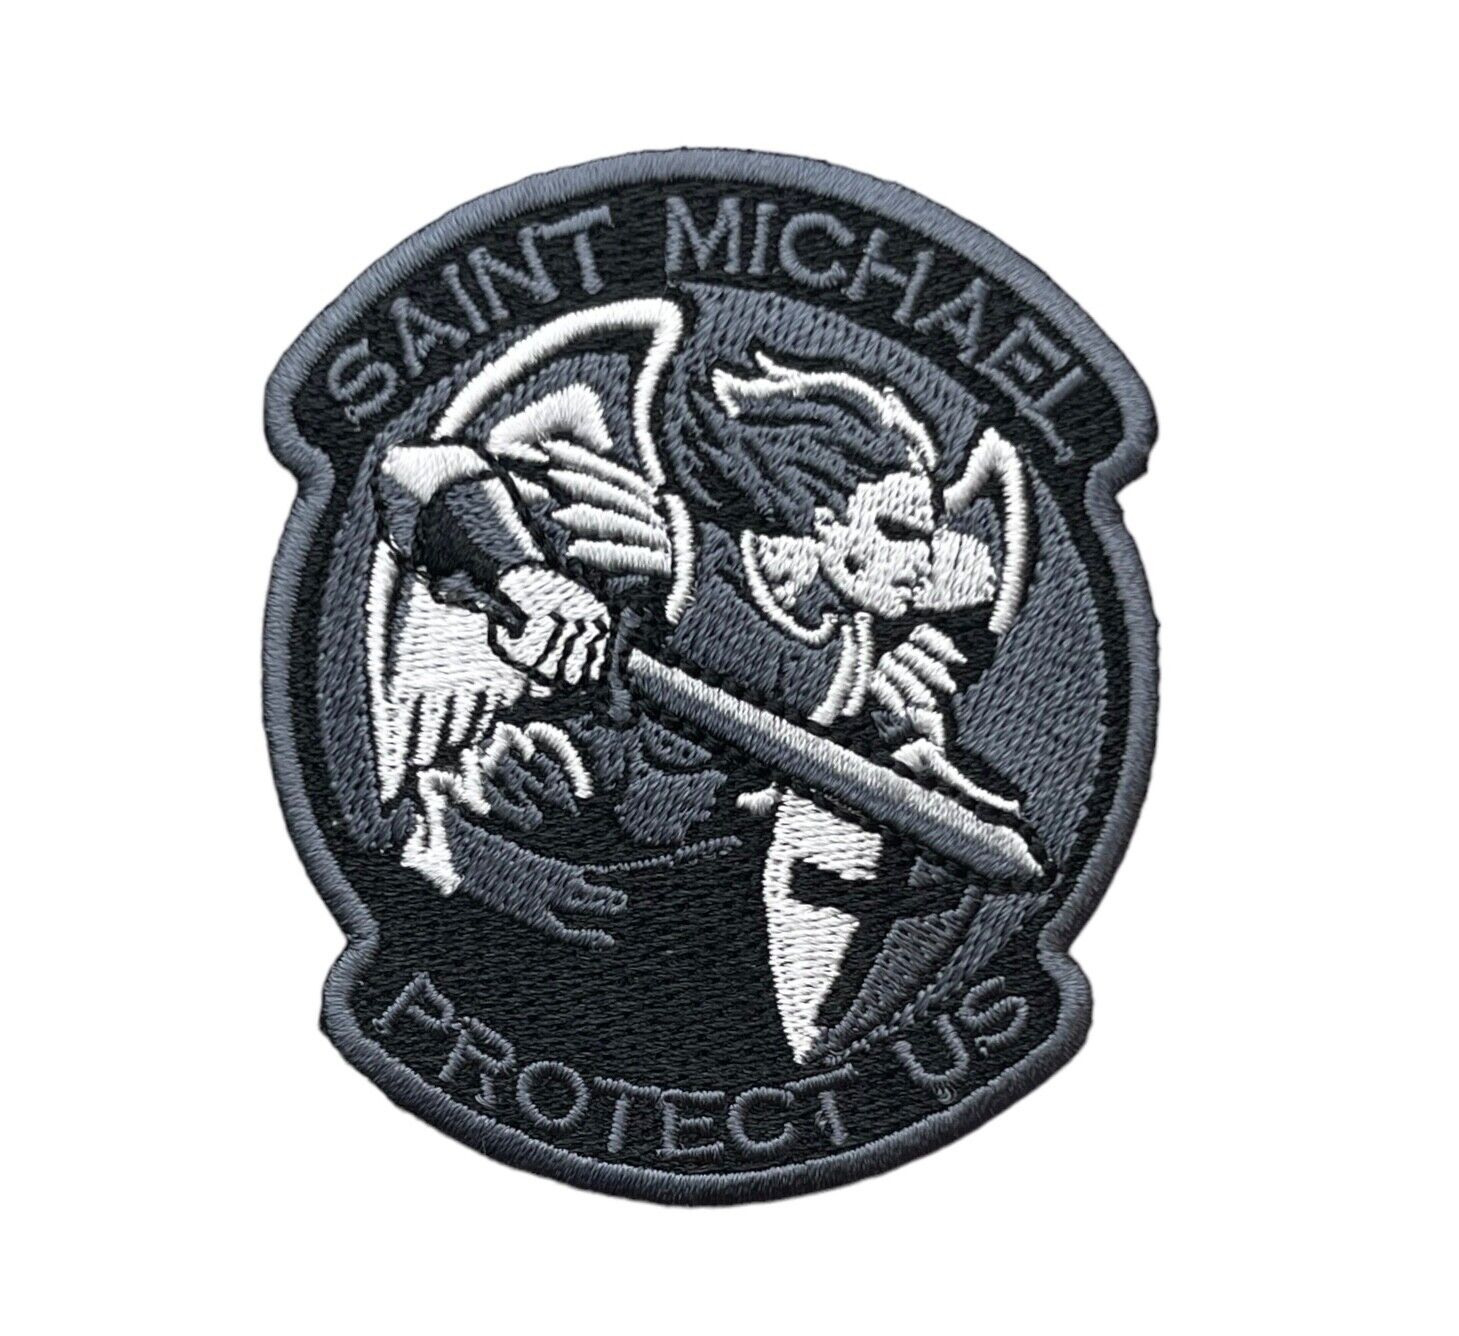 Saint Michael Protect Us 2 7/8 Inch Embroidered Patch PW F7D14C